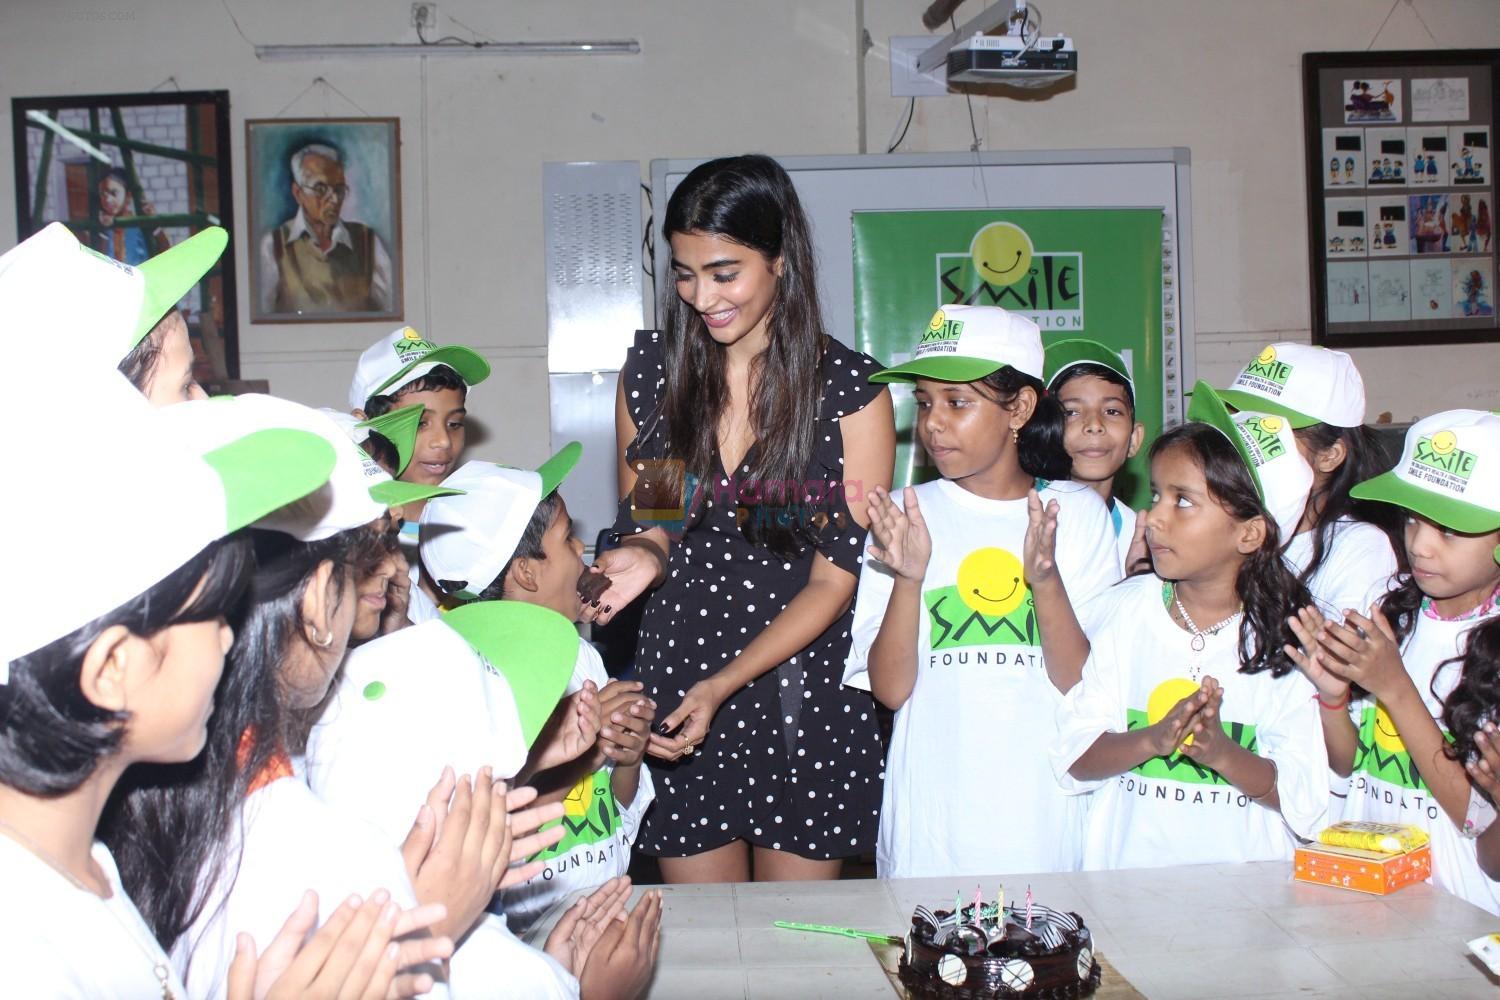 Pooja Hegde Celebrate Her Birthday With Smile Foundation Kids on 13th Oct 2017